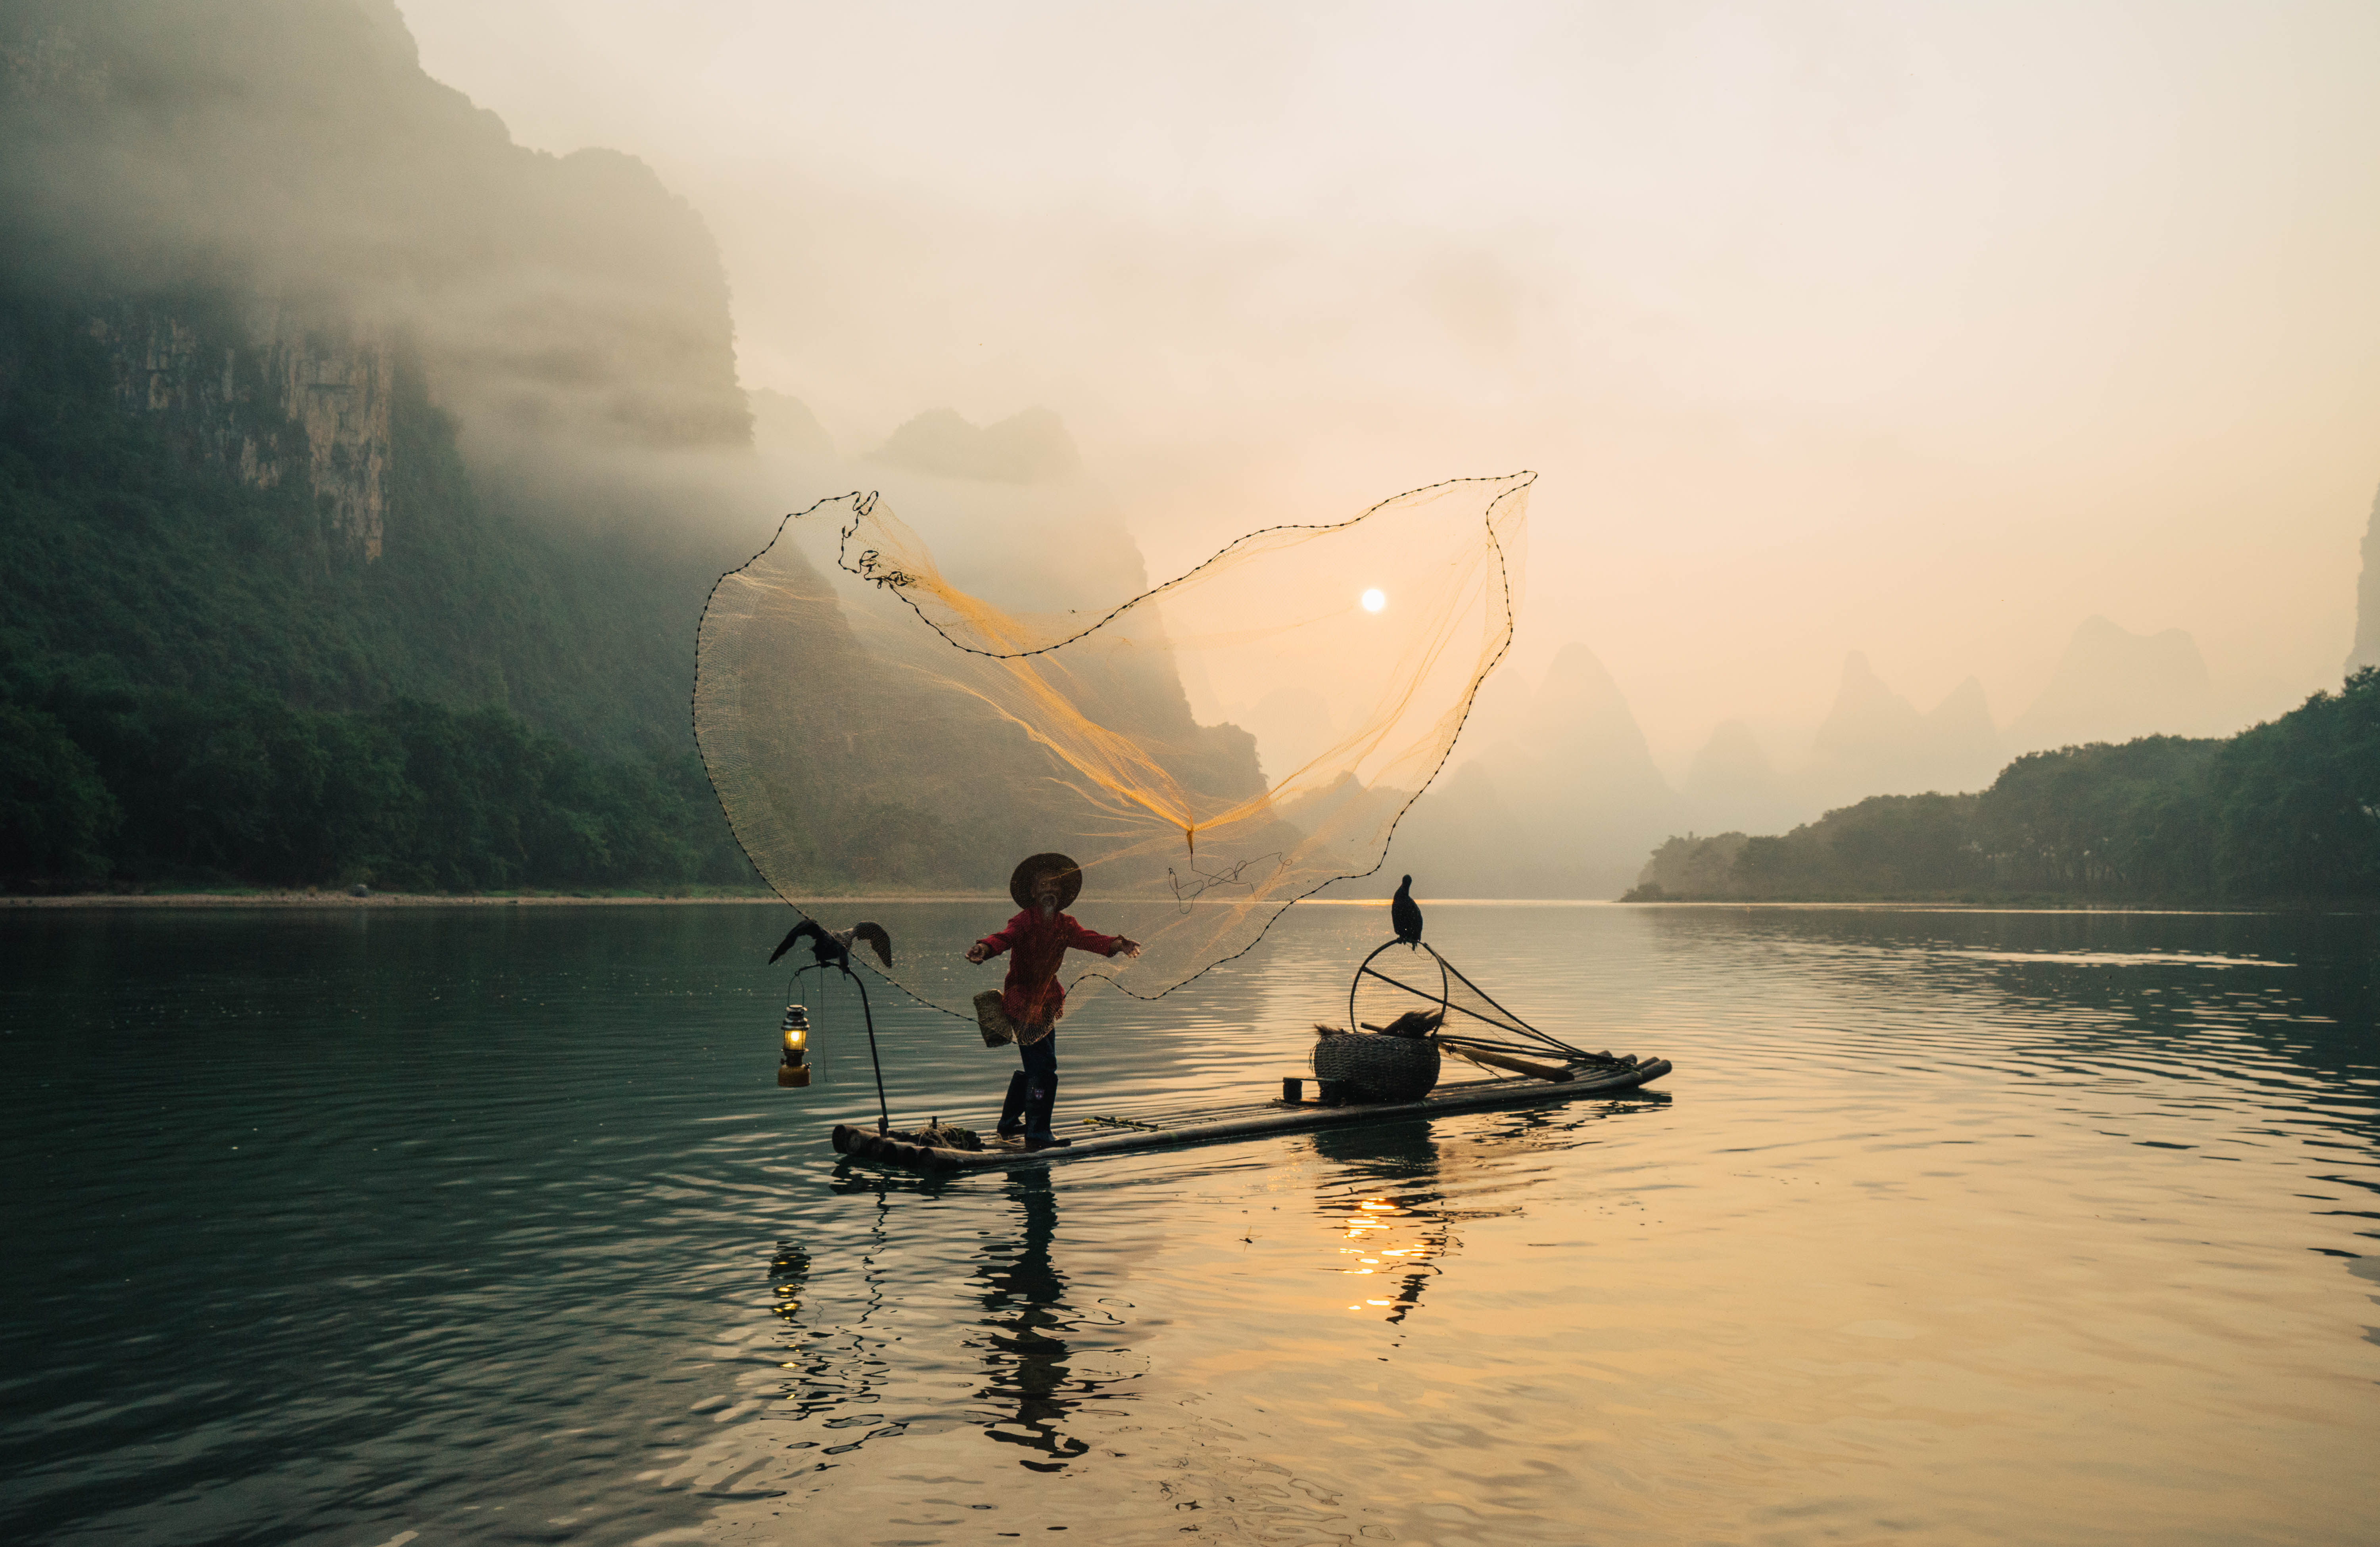 Casting a net into the Li River as the sun rises behind the karst mountains. 
